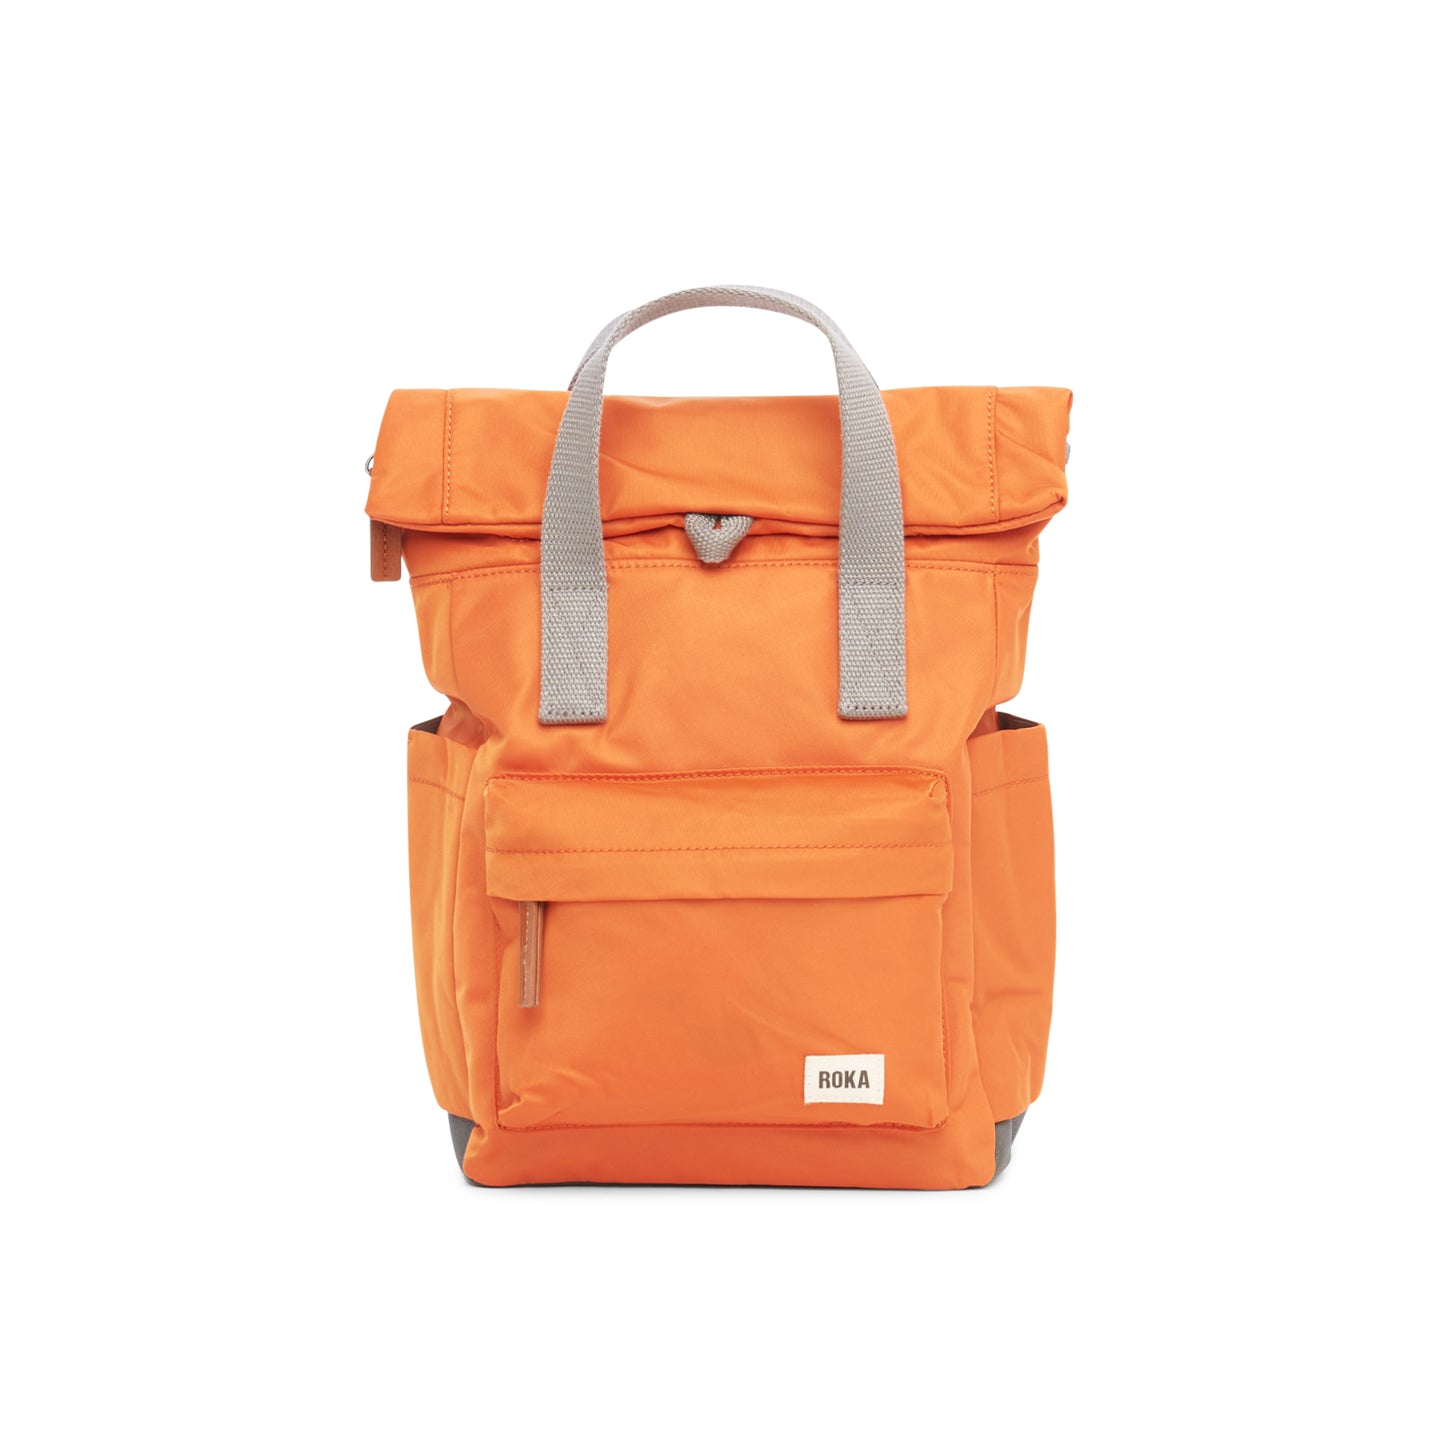 Roka Canfield B Small Bag in Burnt Orange - Sustainable Edition 